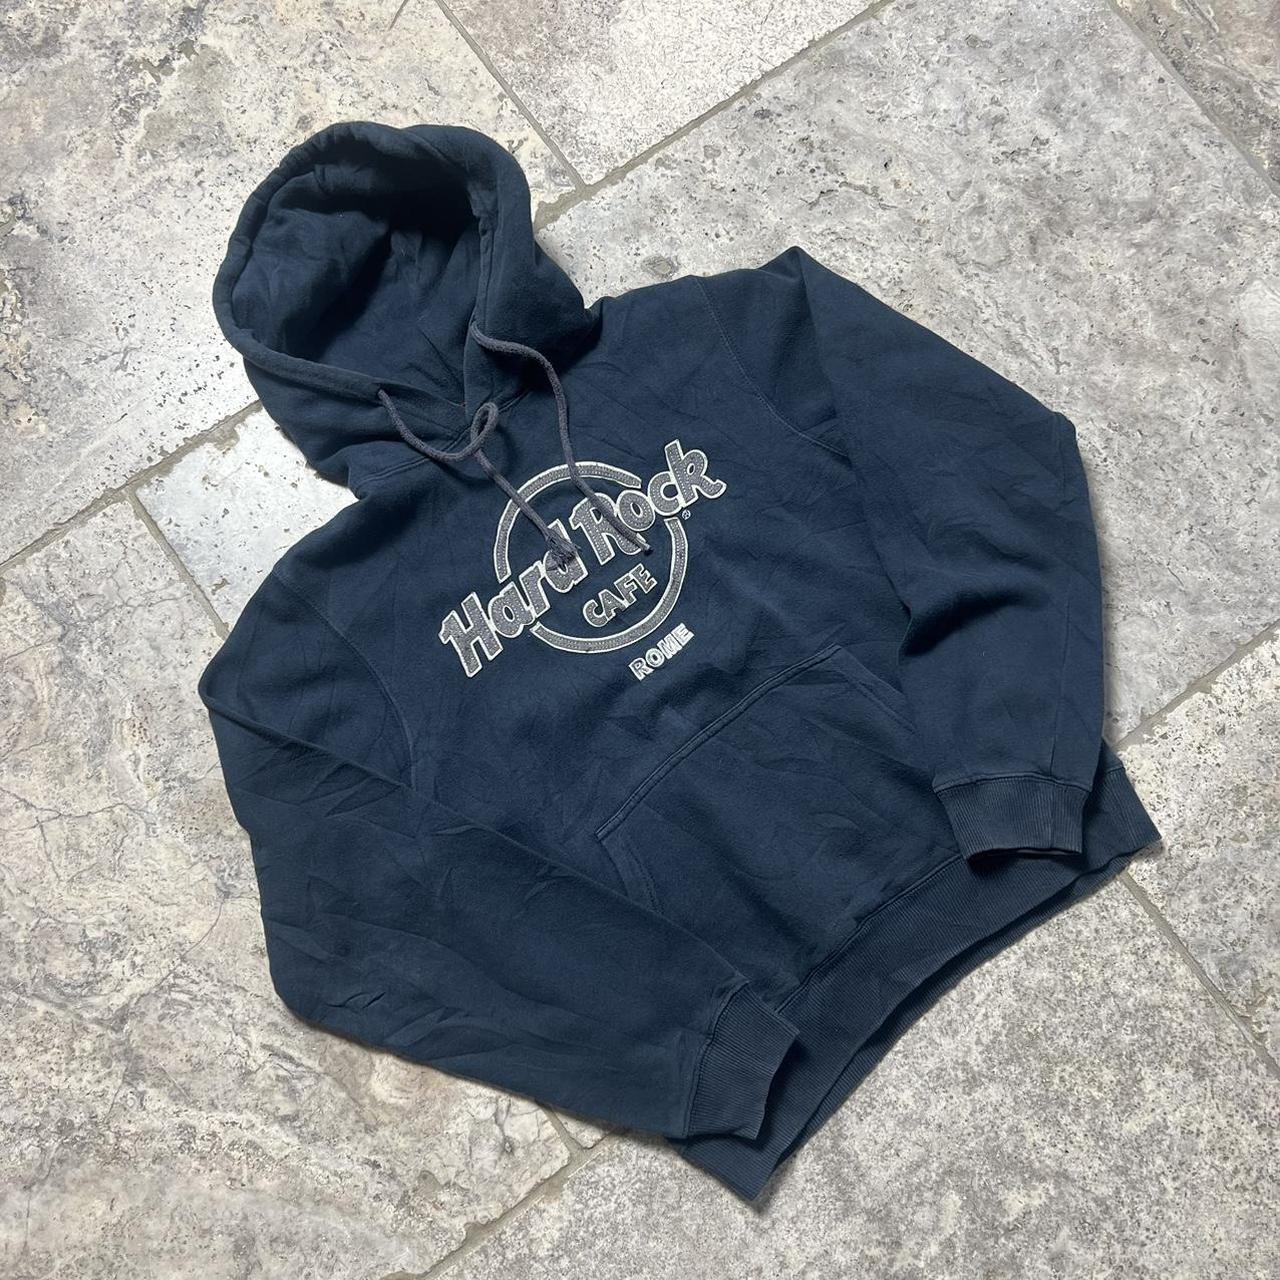 Hard Rock Cafe hoodie small